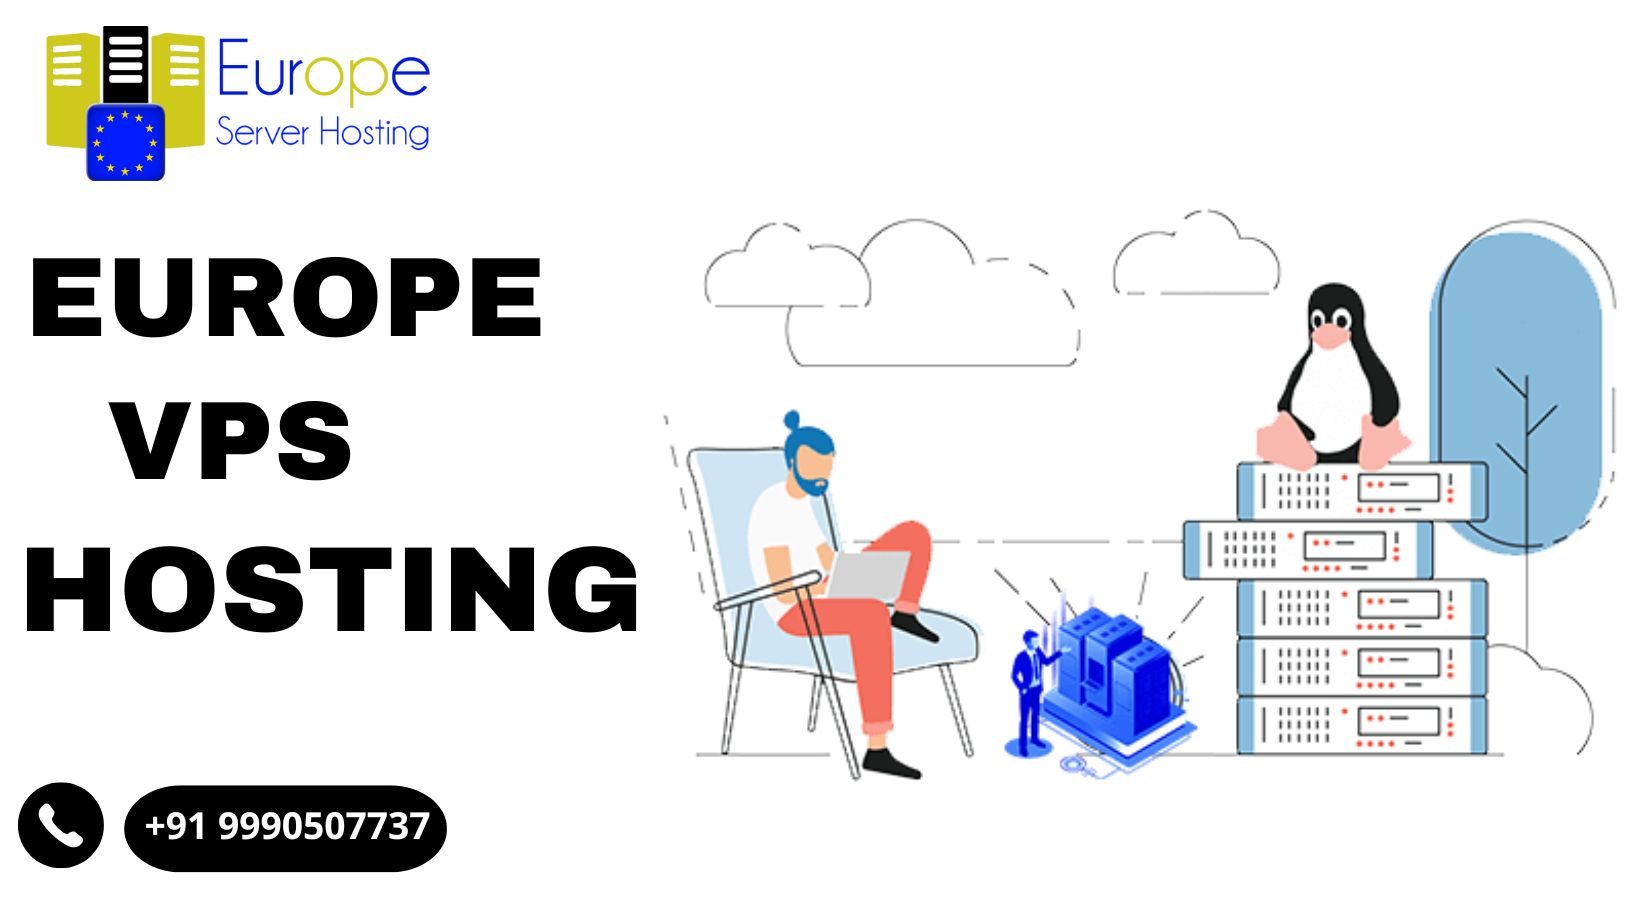 Europe VPS hosting solutions provide a high-performance and reliable hosting environment for businesses of all sizes. With its strategic location, robust infrastructure, and commitment to data privacy, Europe is an excellent choice for hosting your business website or applications